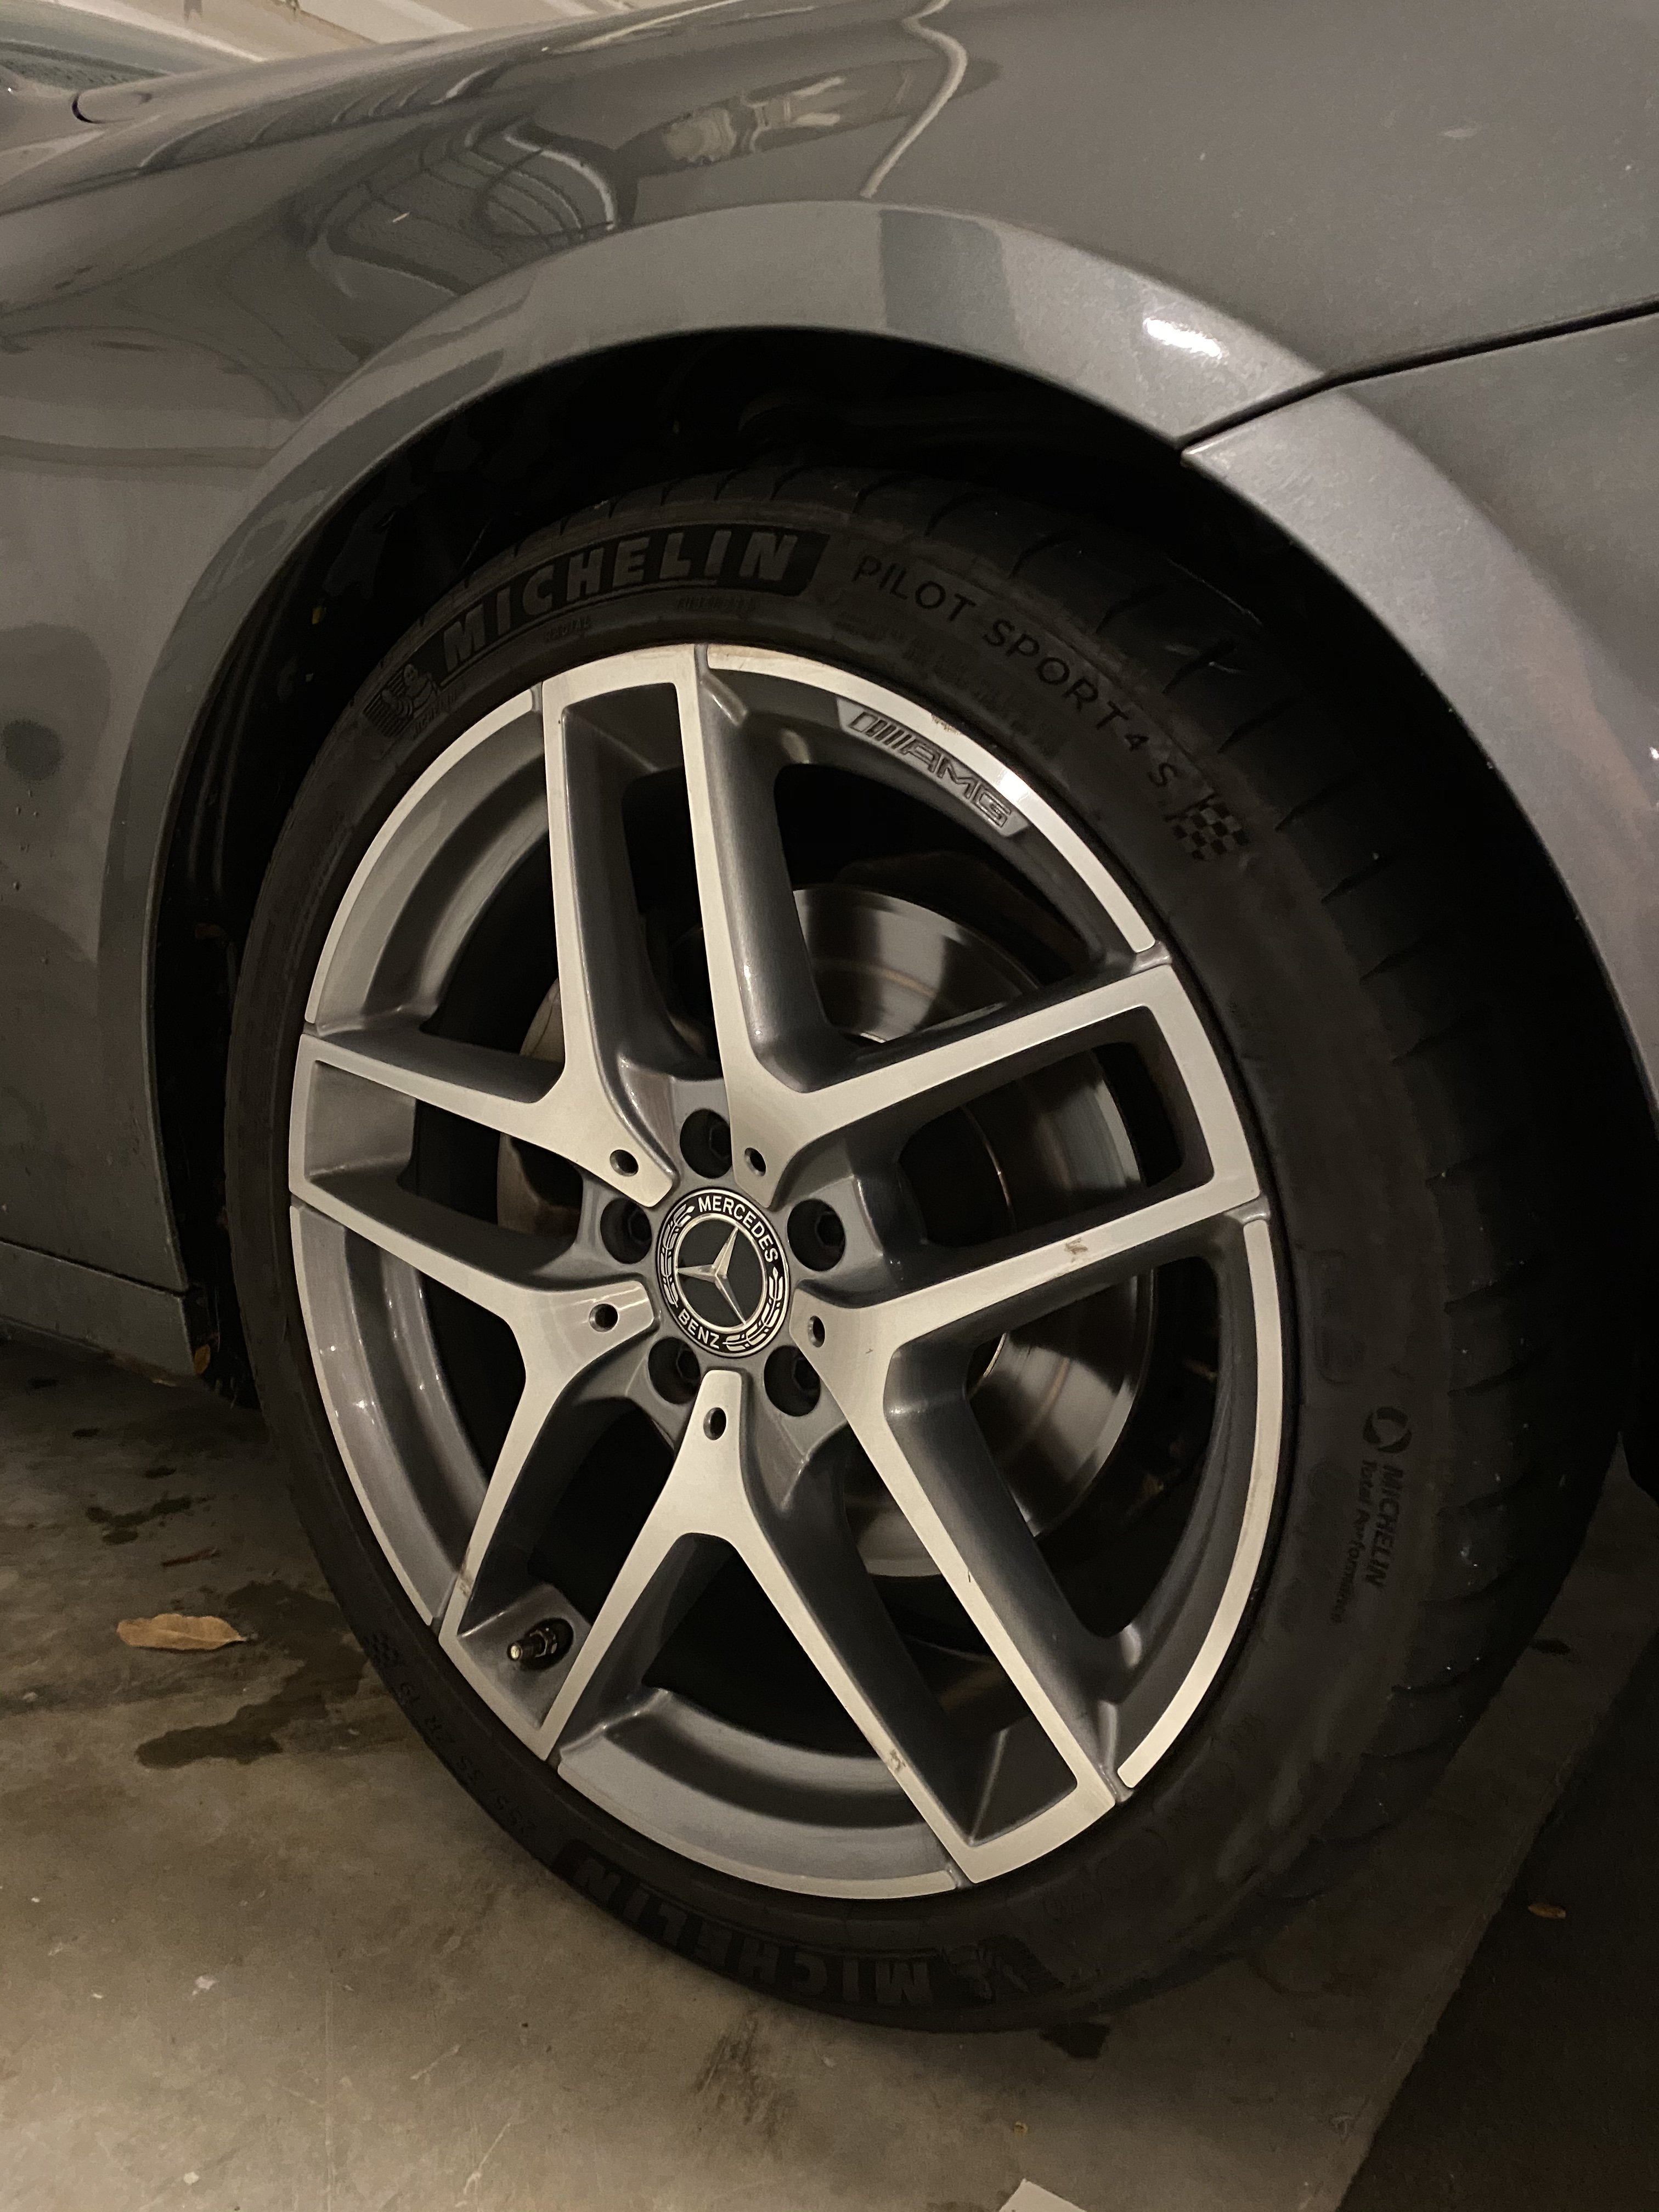 Genuine 19” AMG rims for GLC, EClass WanttoSell (Car Related Items ONLY) SGMerc